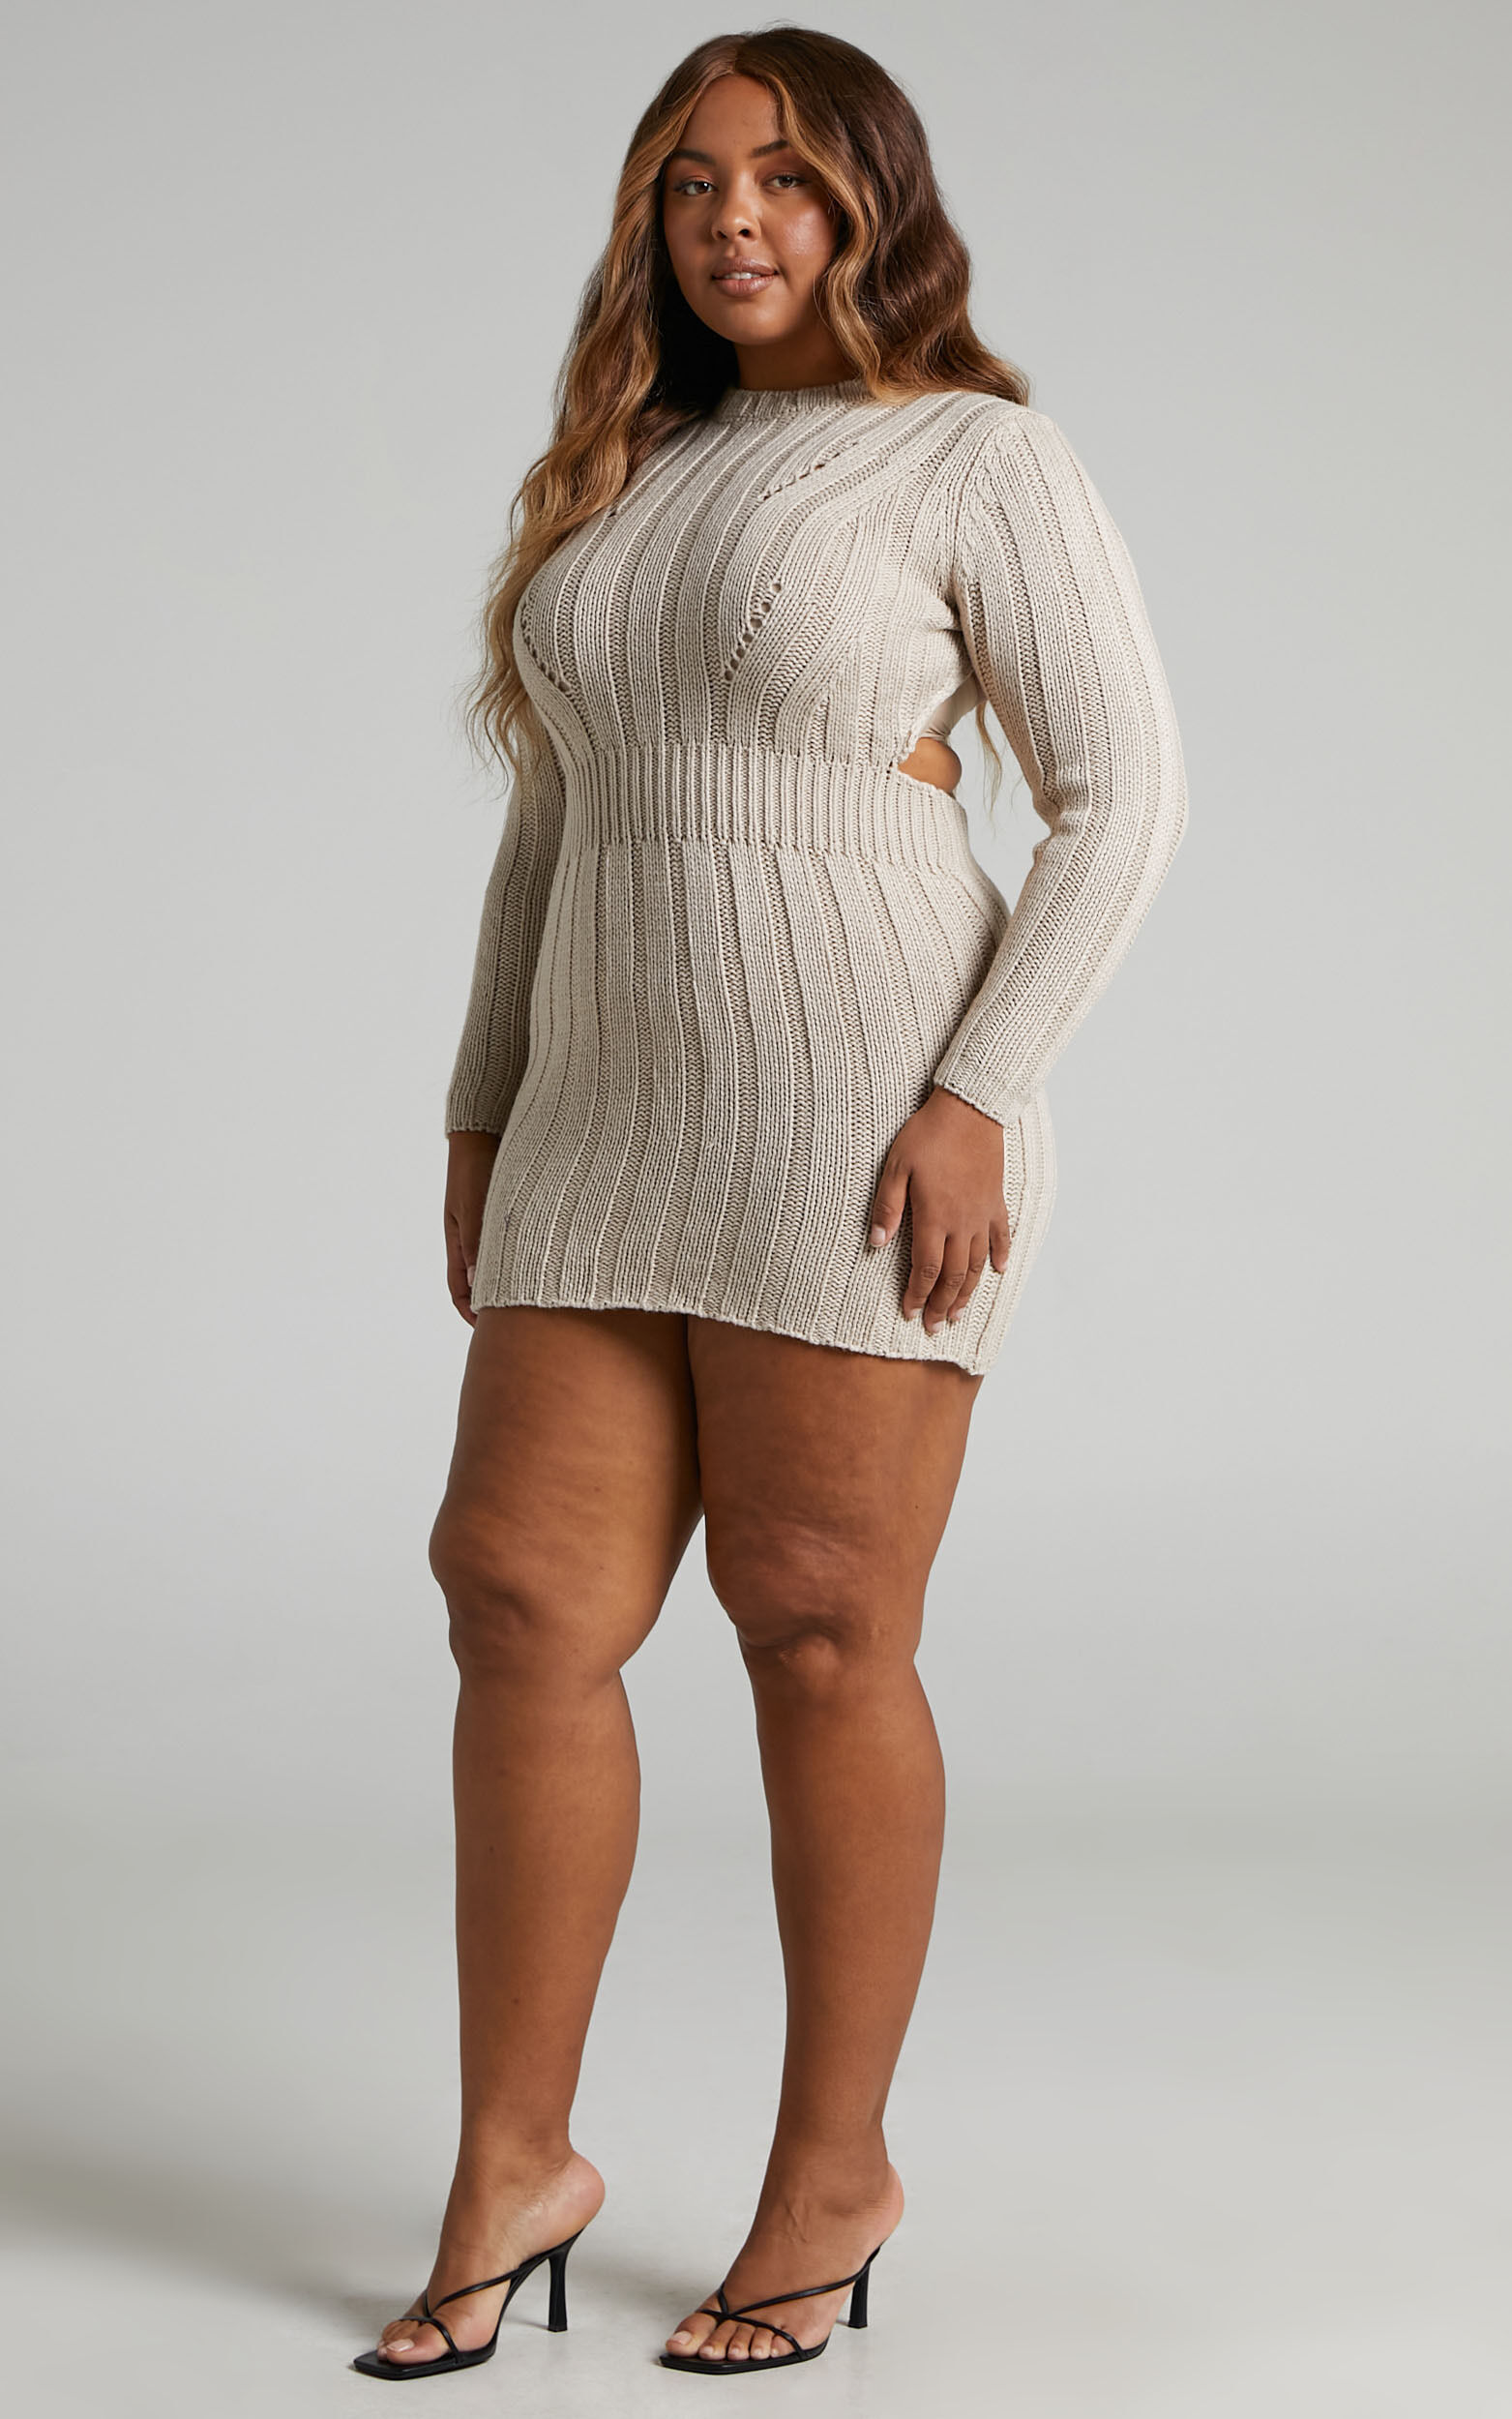 Ghamie Knit Bodycon Long Sleeve Open Back Mini Dress in Beige - 06, BRN1, super-hi-res image number null